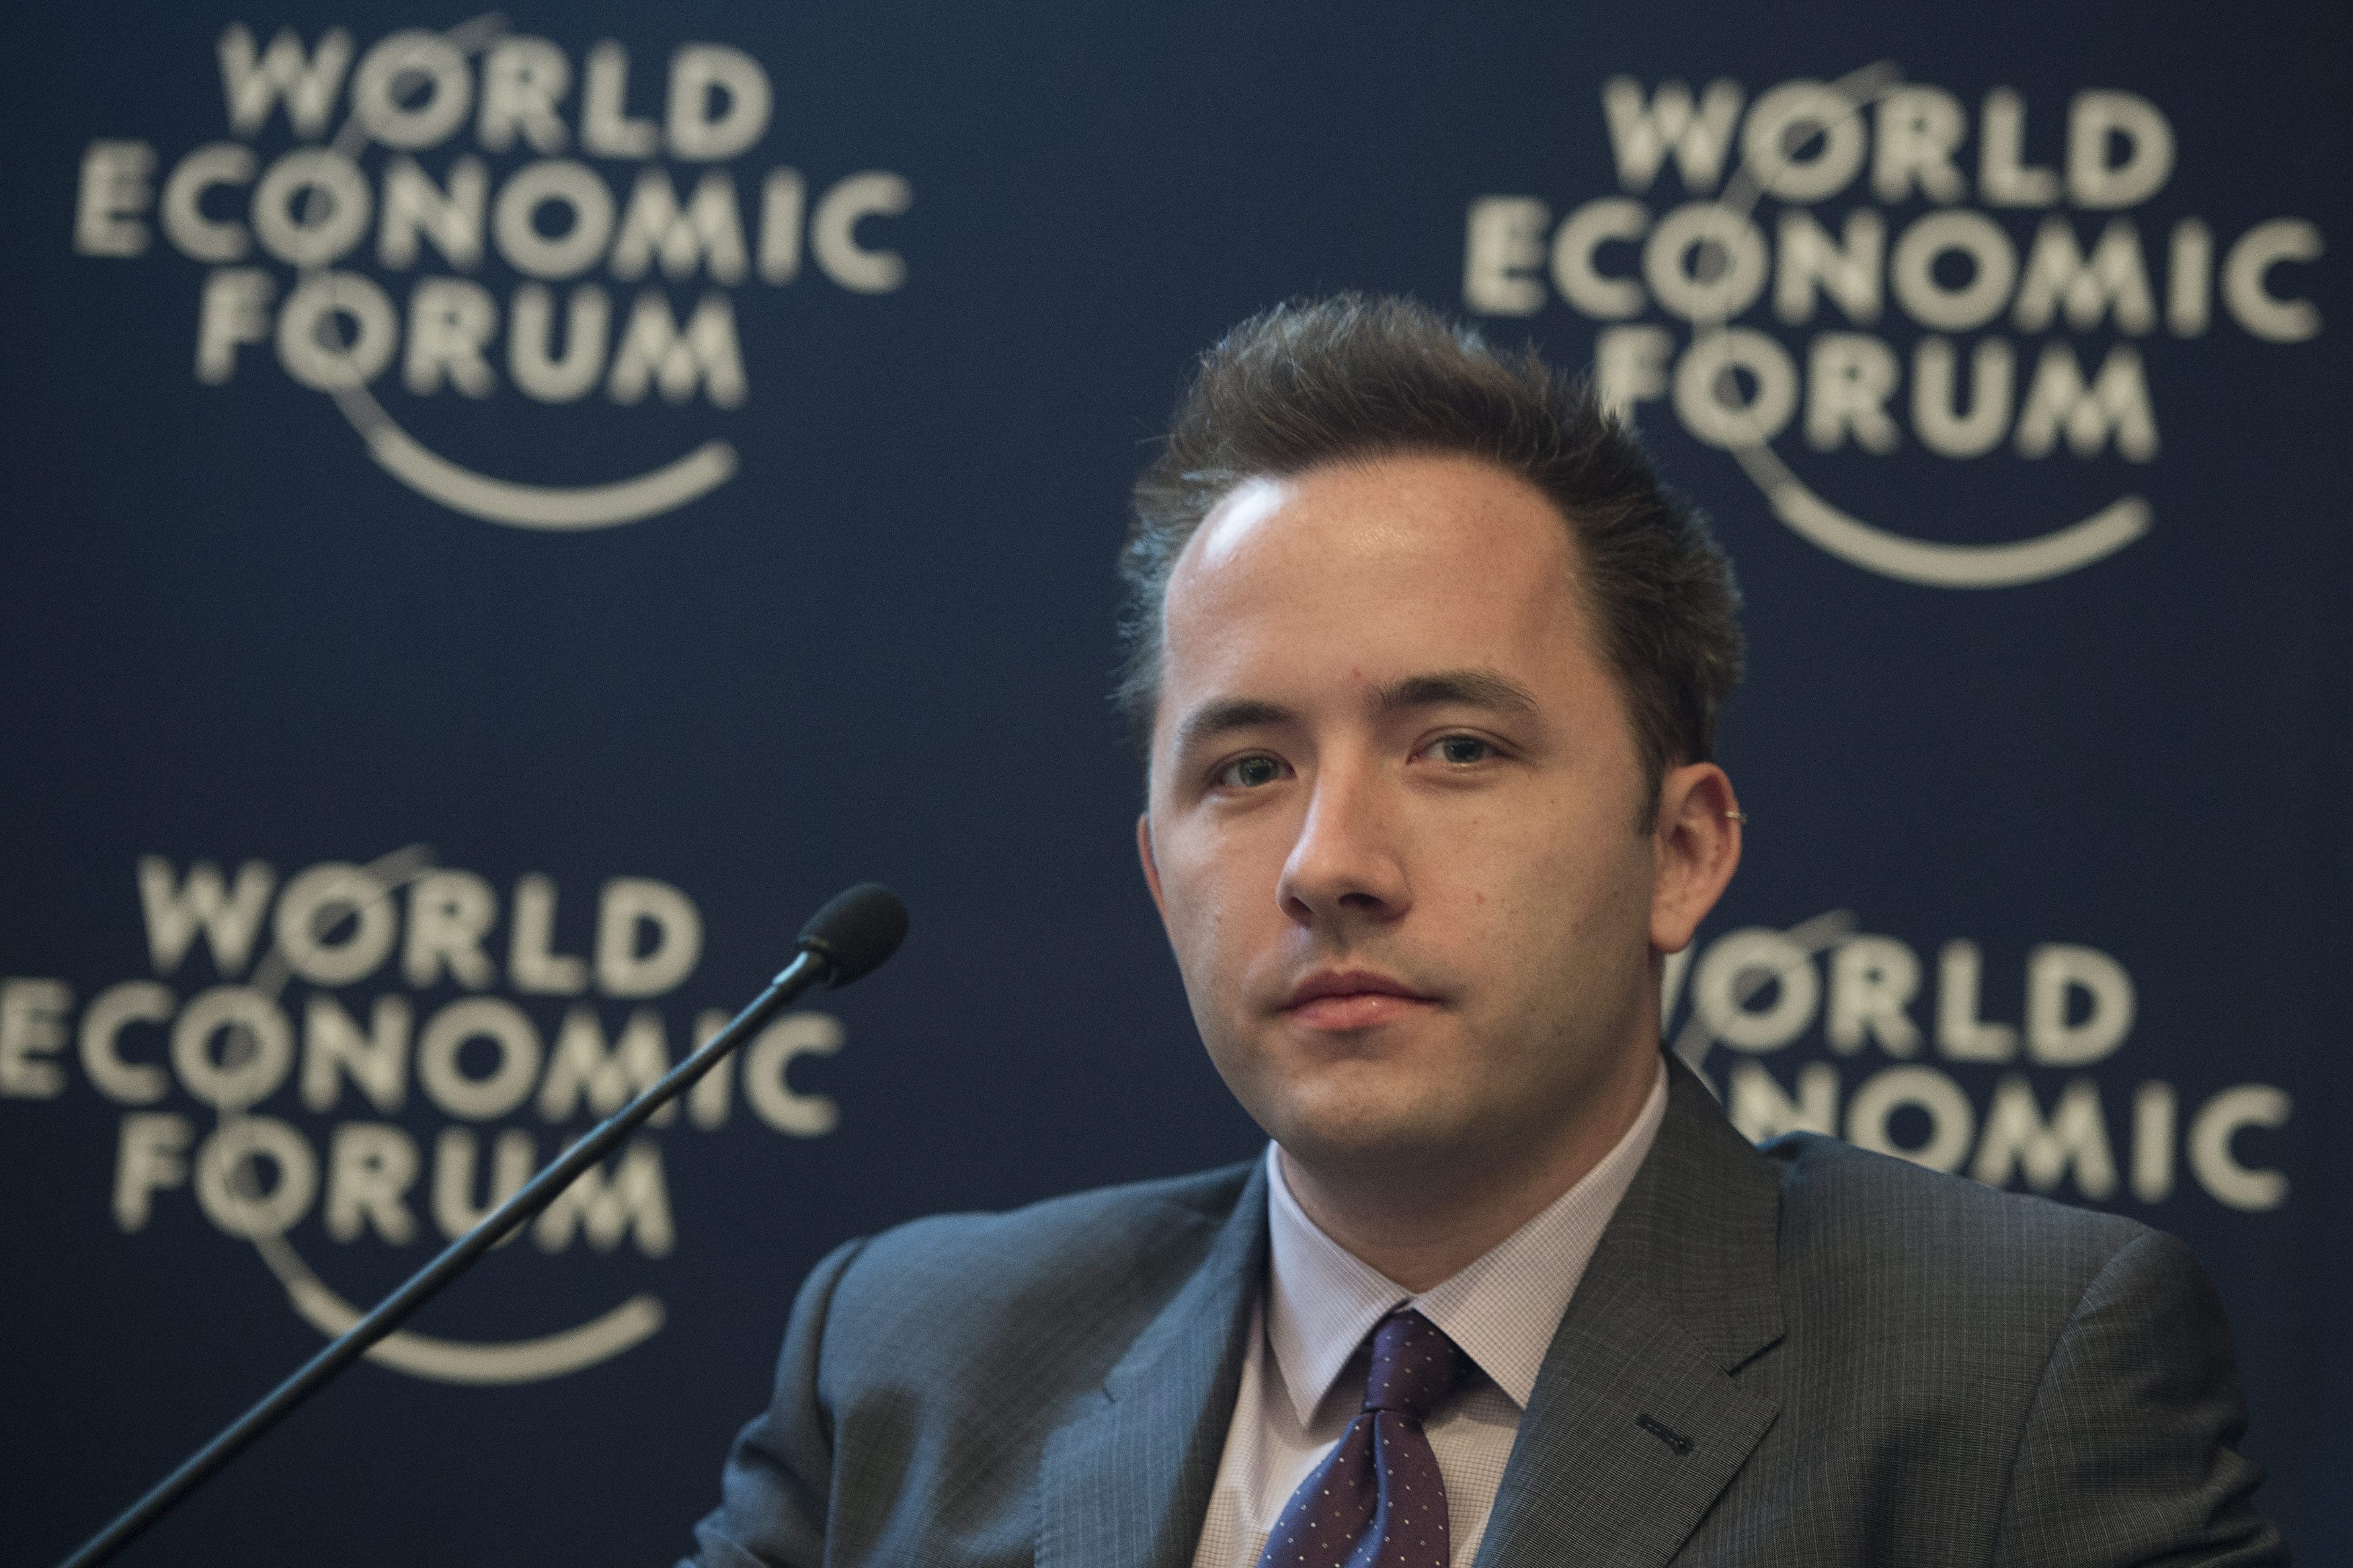 2013-01-22 11:56:25 epa03551391 Drew Houston, Chief Executive Officer, Dropbox, attends a panel session during a panel session of the 43rd Annual Meeting of the World Economic Forum, WEF, in Davos, Switzerland, 23 January 2013. The overarching theme of the meeting, which takes place from 23 to 27 January 2013, is 'Resilient Dynamism'. EPA/JEAN-CHRISTOPHE BOTT